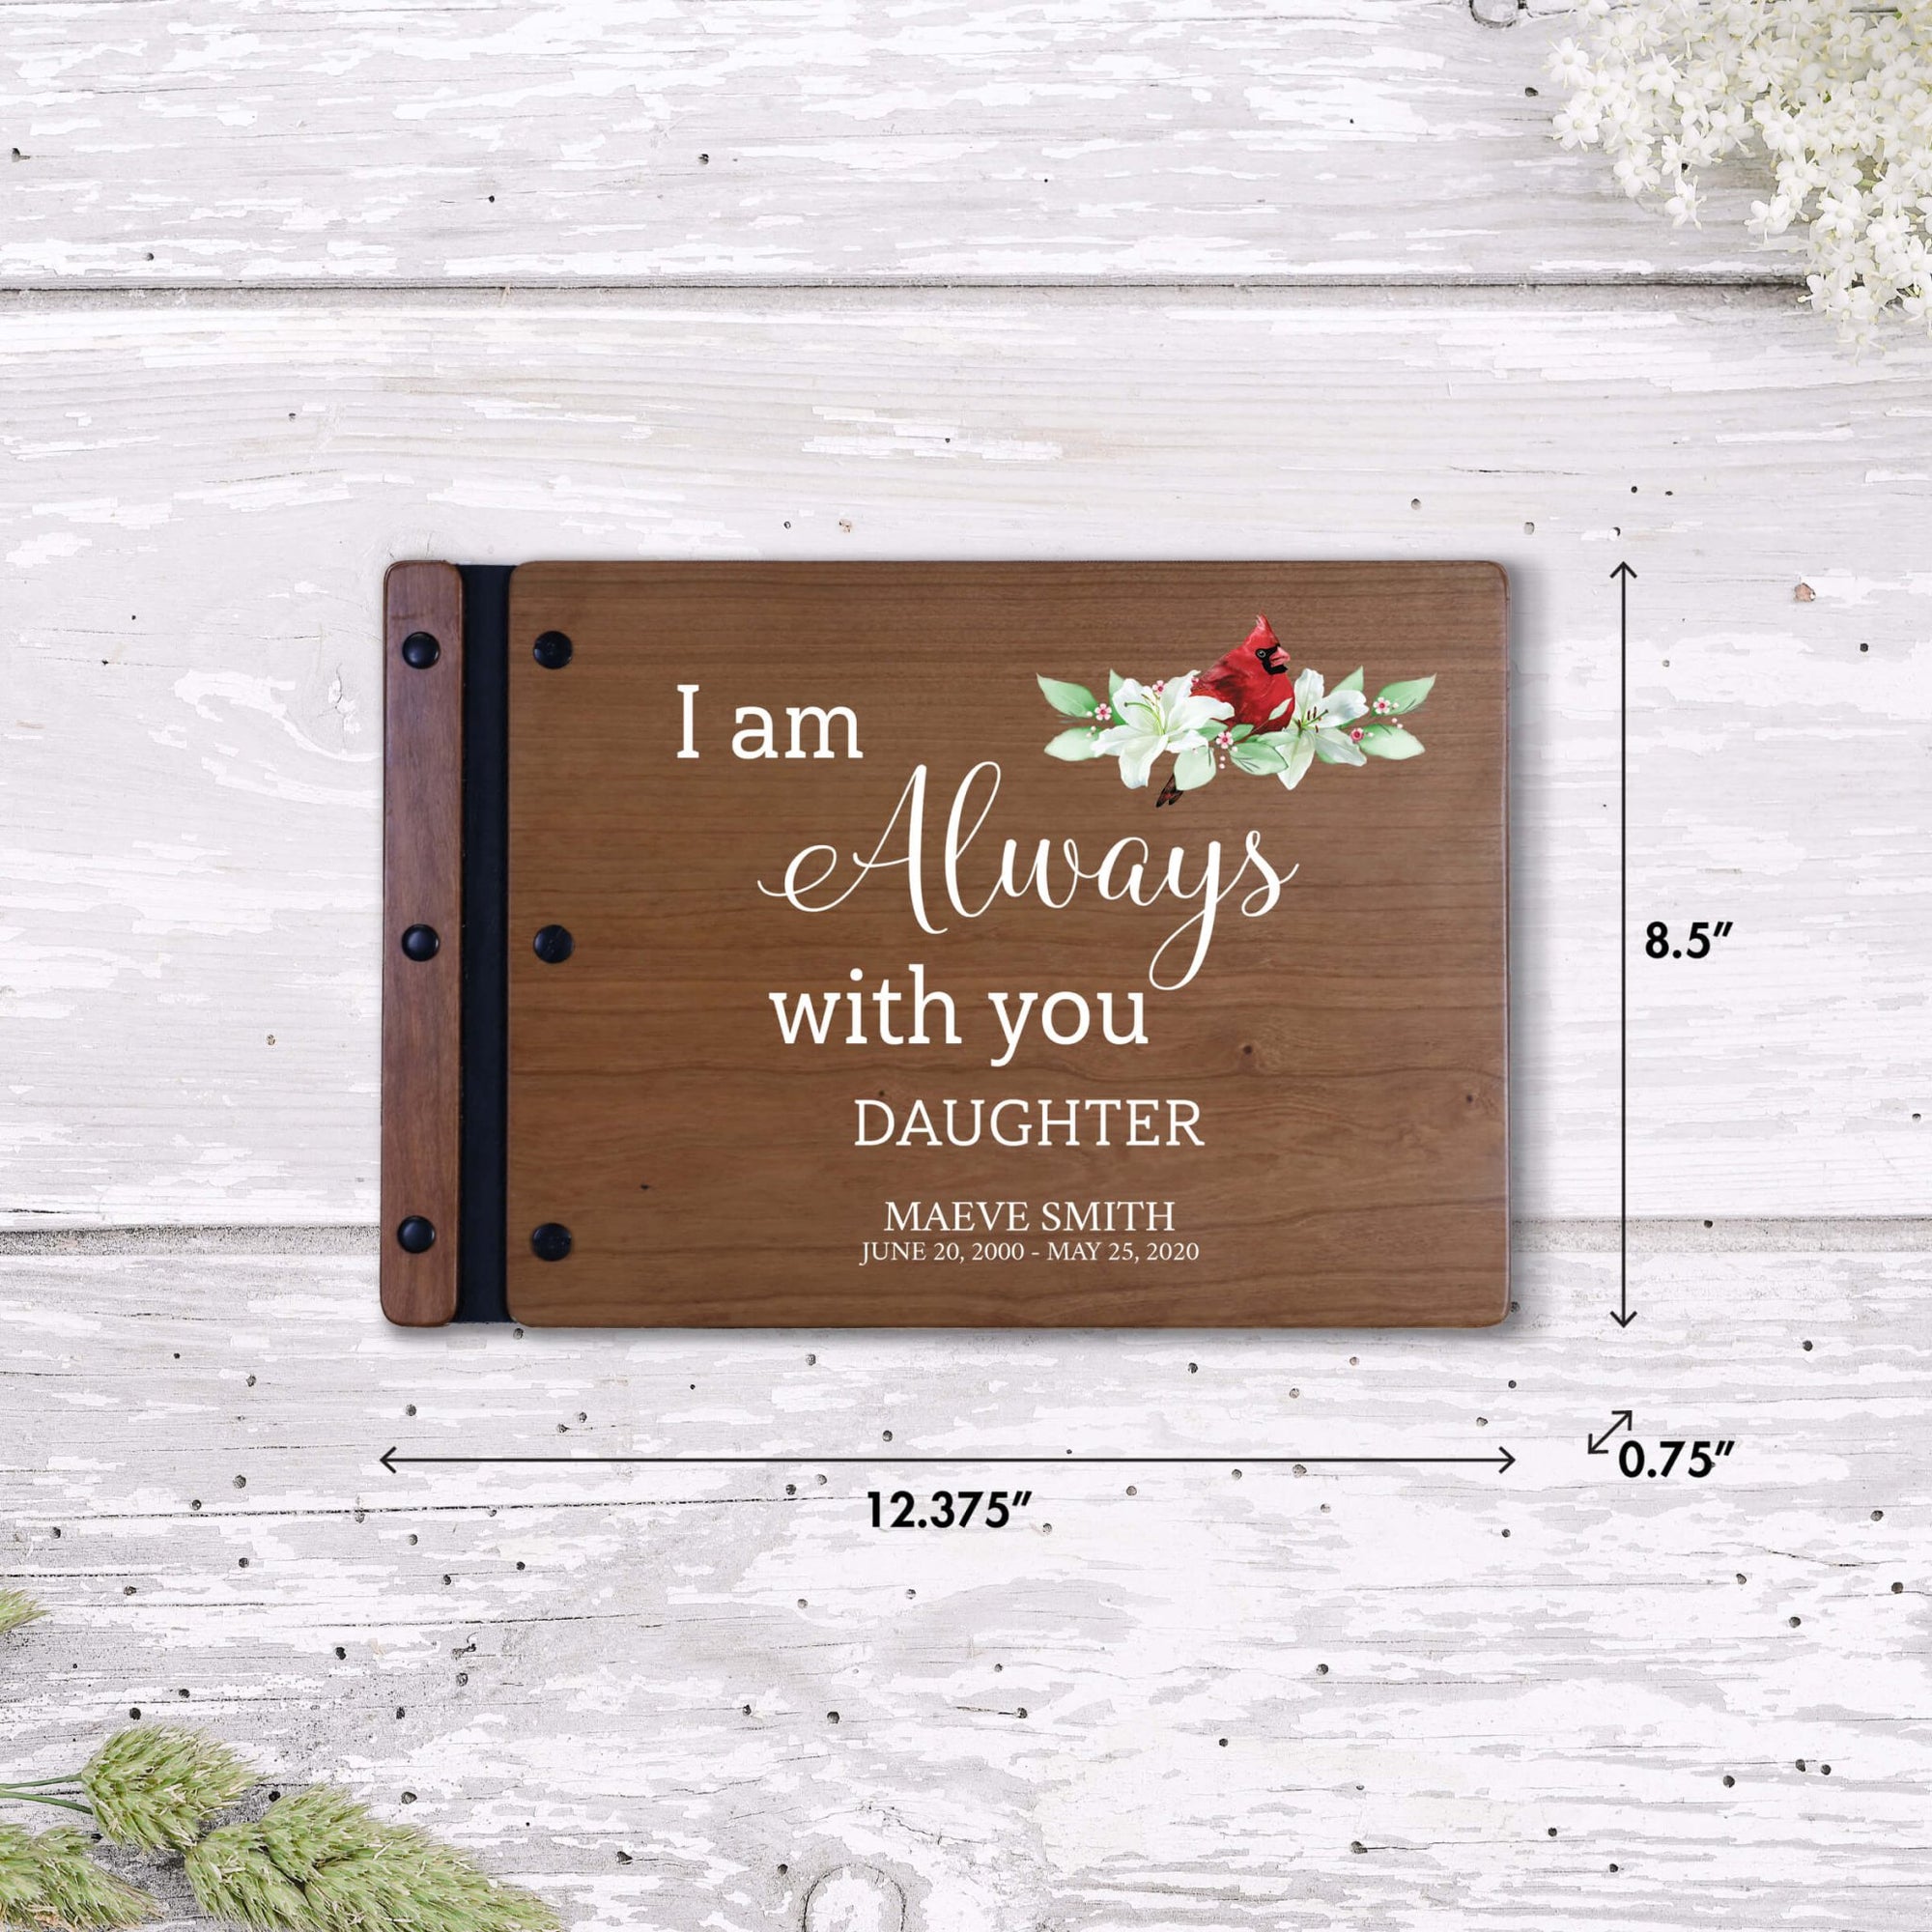 Personalized Funeral Wooden Guestbook for Memorial Service - I Am Always With You - LifeSong Milestones